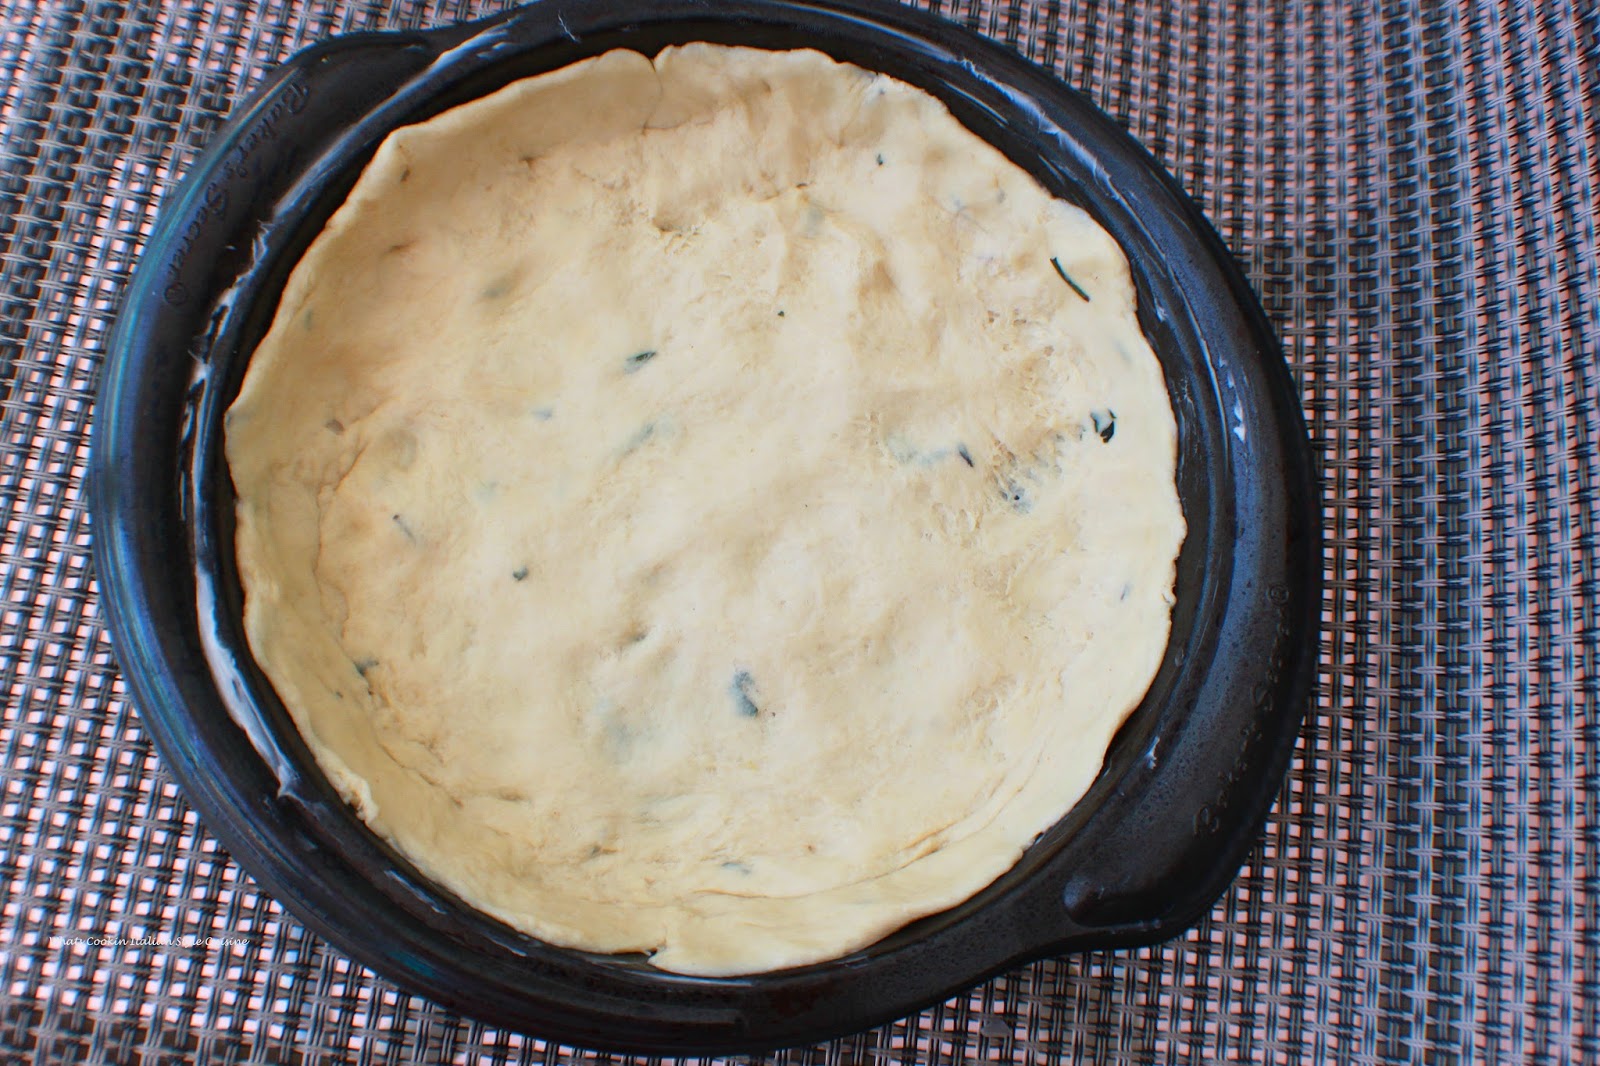 This is delicious pizza dough stuffed with cheese and fresh herbs. A  homemade bread dough that was mom's recipe. This is called a focaccia and italian herb bread that is stuffed with cheese. Rosemary is a main herb flavored in this bread along with black pepper and fresh basil